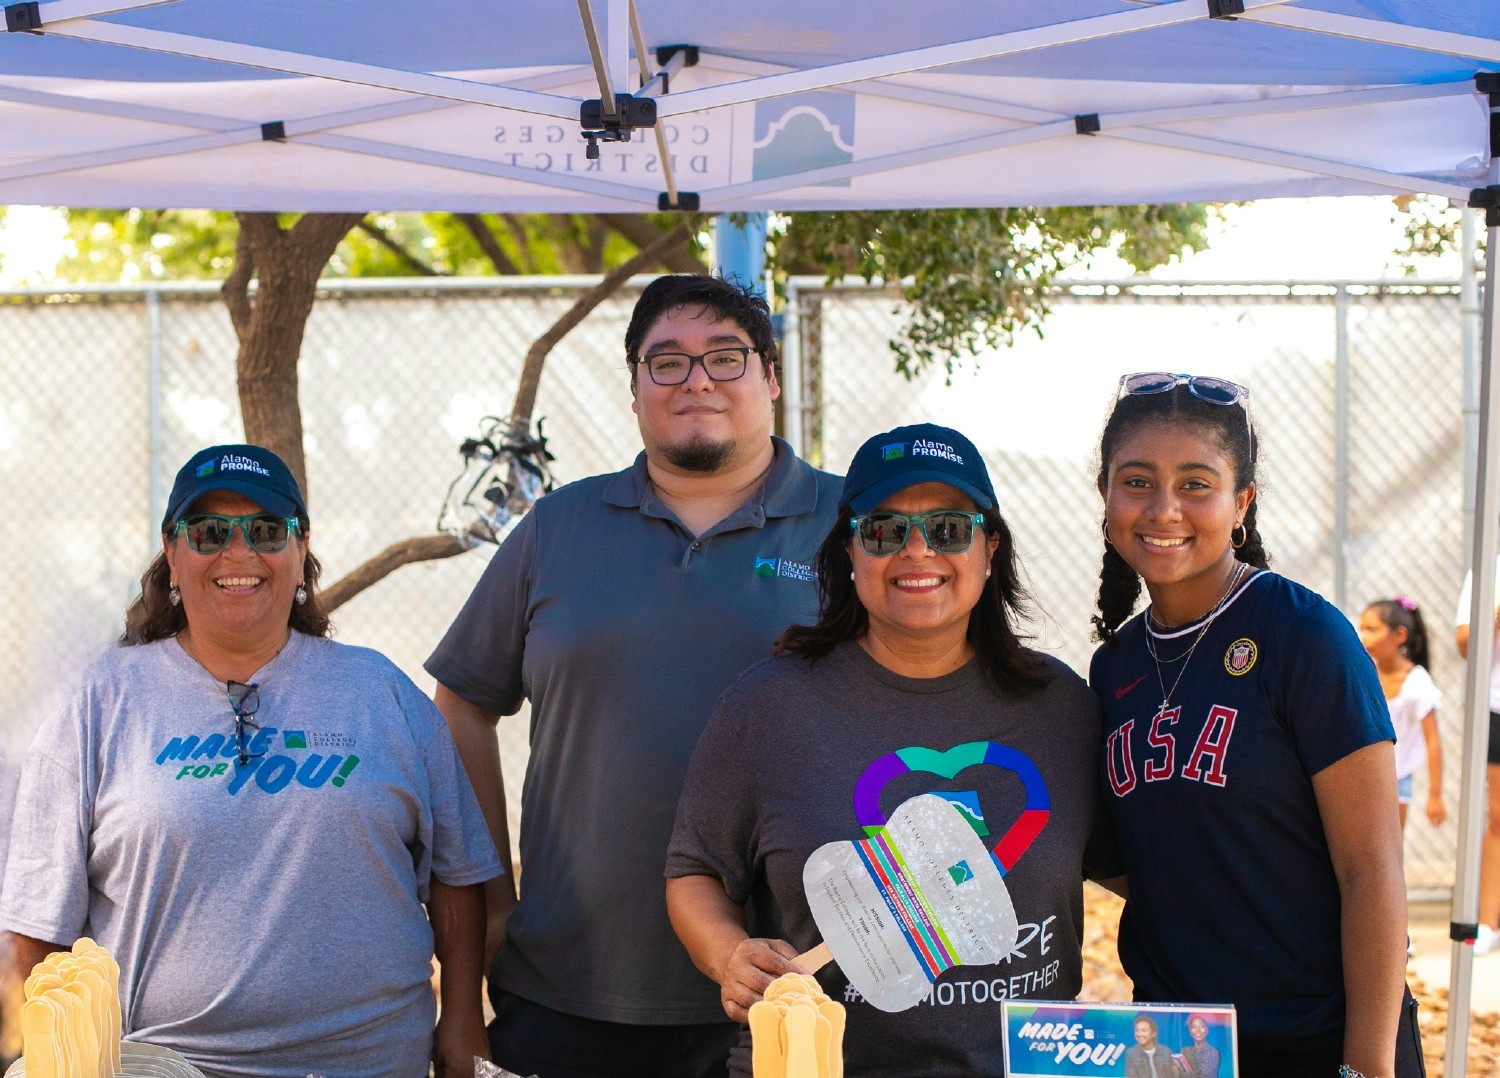 Alamo Colleges District employees participate in a community event to promote free tuition as part of the AlamoPROMISE